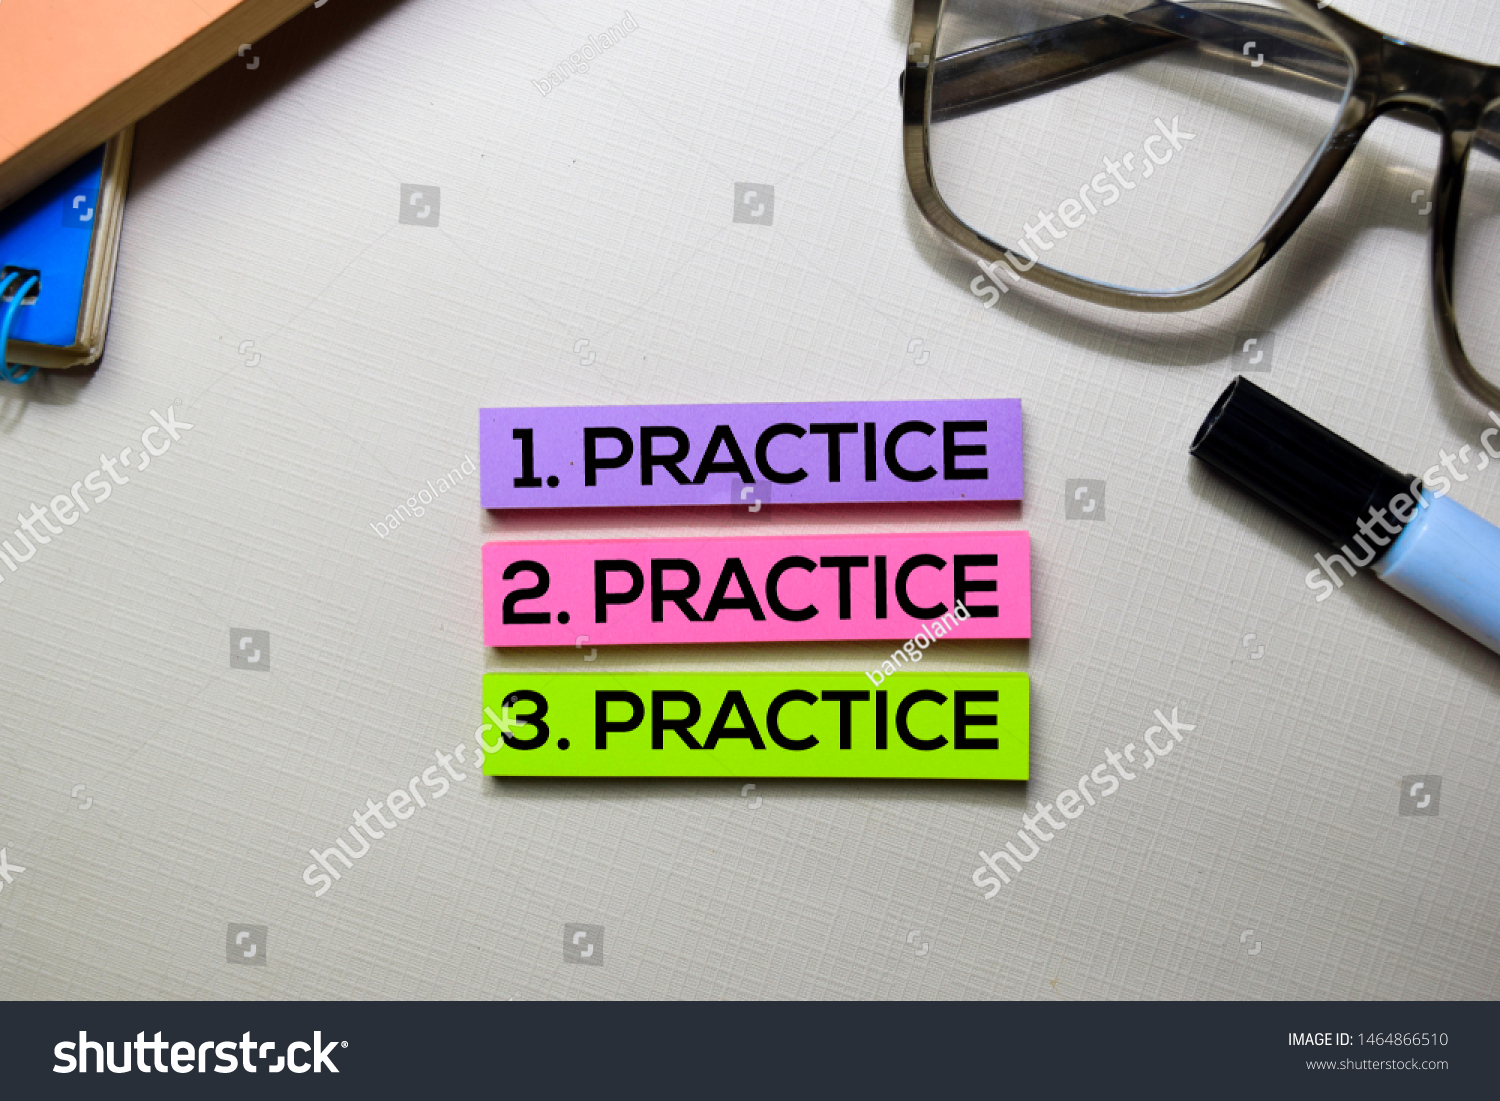 Practice. Practice. Practice text on sticky notes isolated on office desk #1464866510